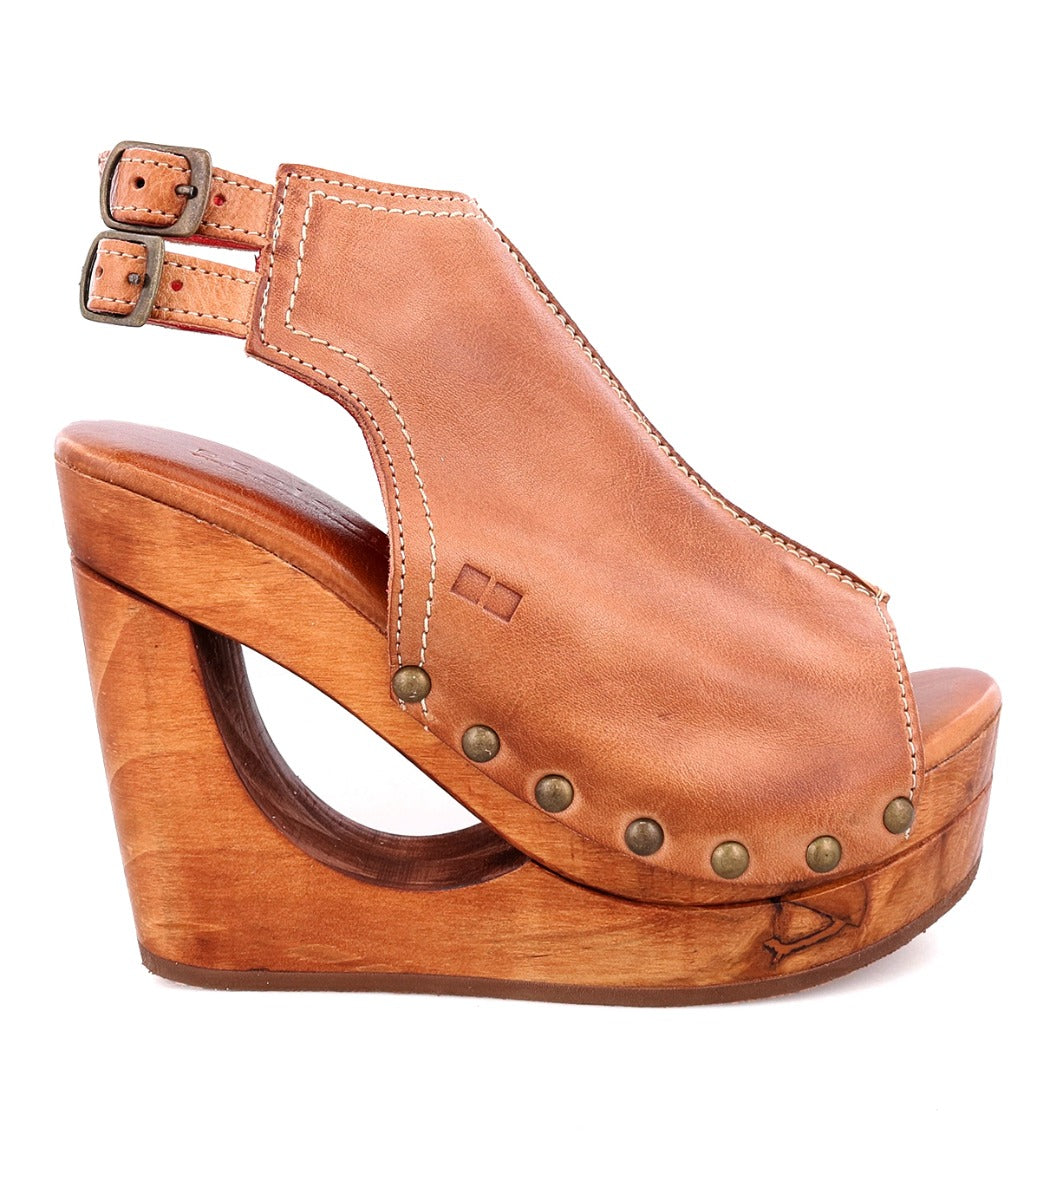 An Imelda women's wooden sandal with a wooden platform from Bed Stu.